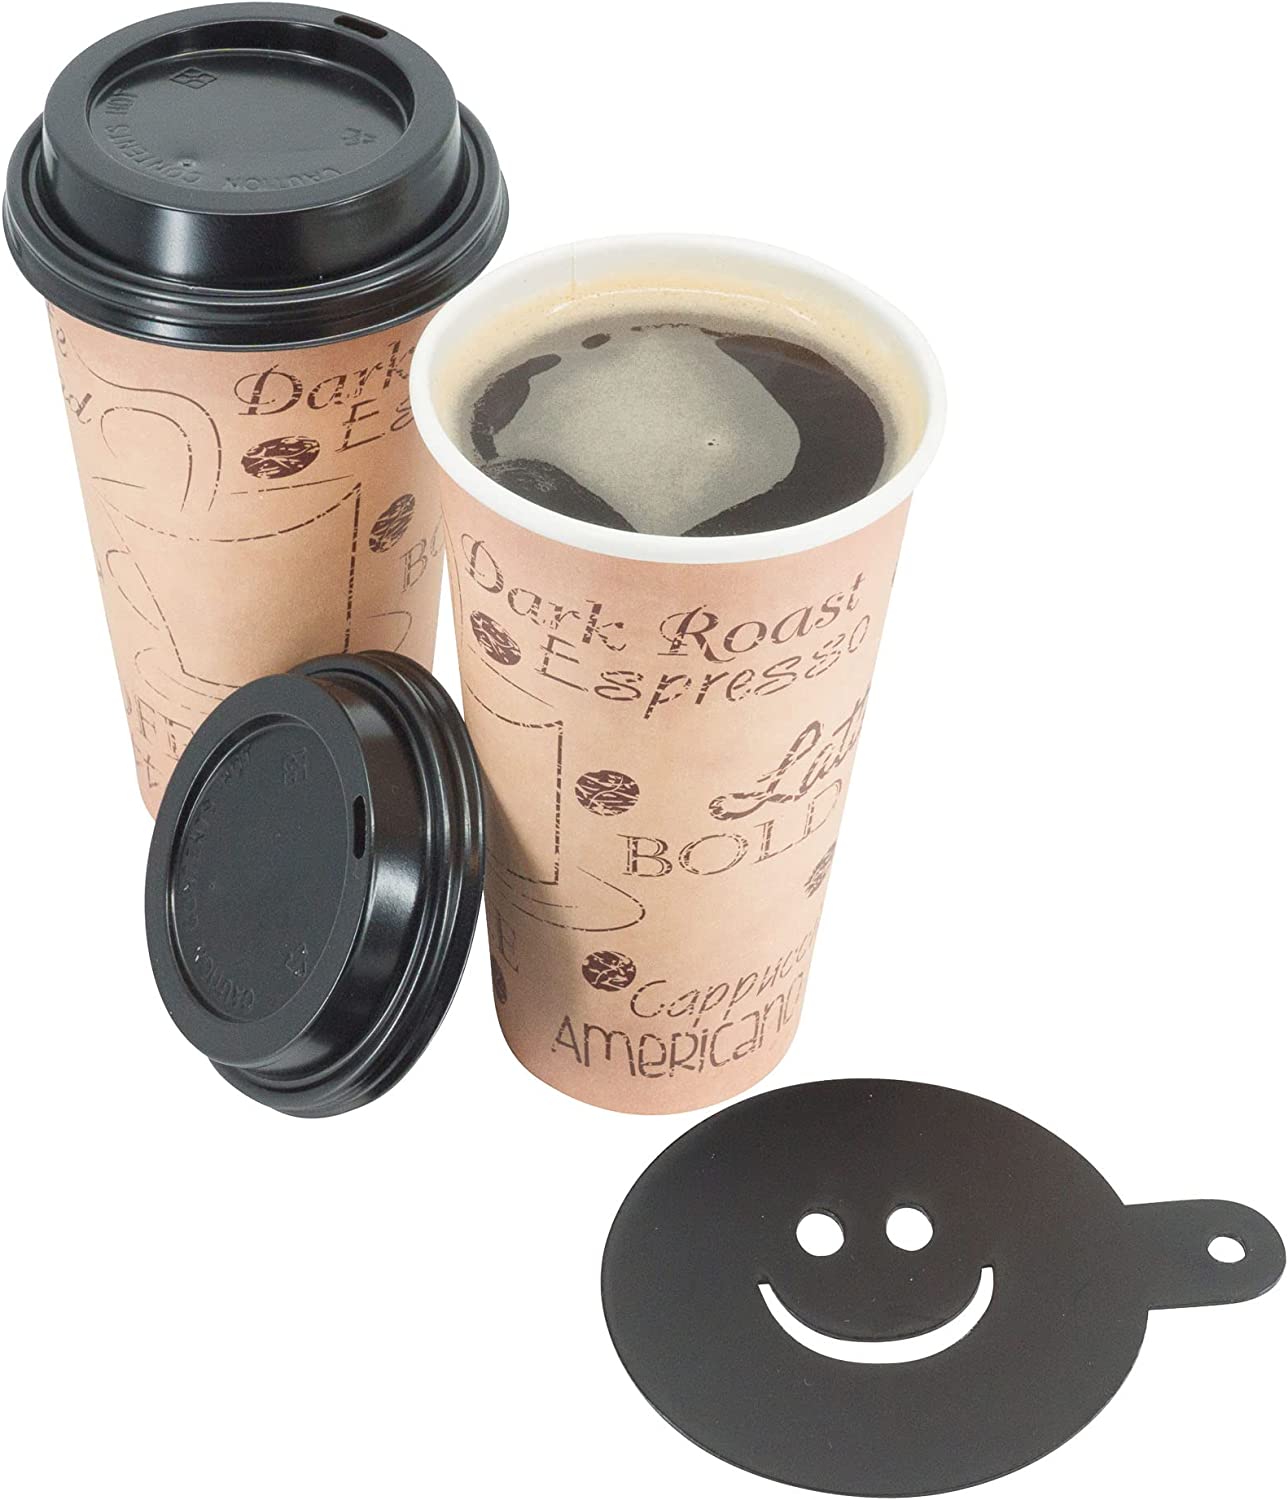 EXOSIA Disposable Coffee Cups With Lids - 12 oz Coffee Cups - To Go Coffee  Cups - Paper Coffee Cups …See more EXOSIA Disposable Coffee Cups With Lids